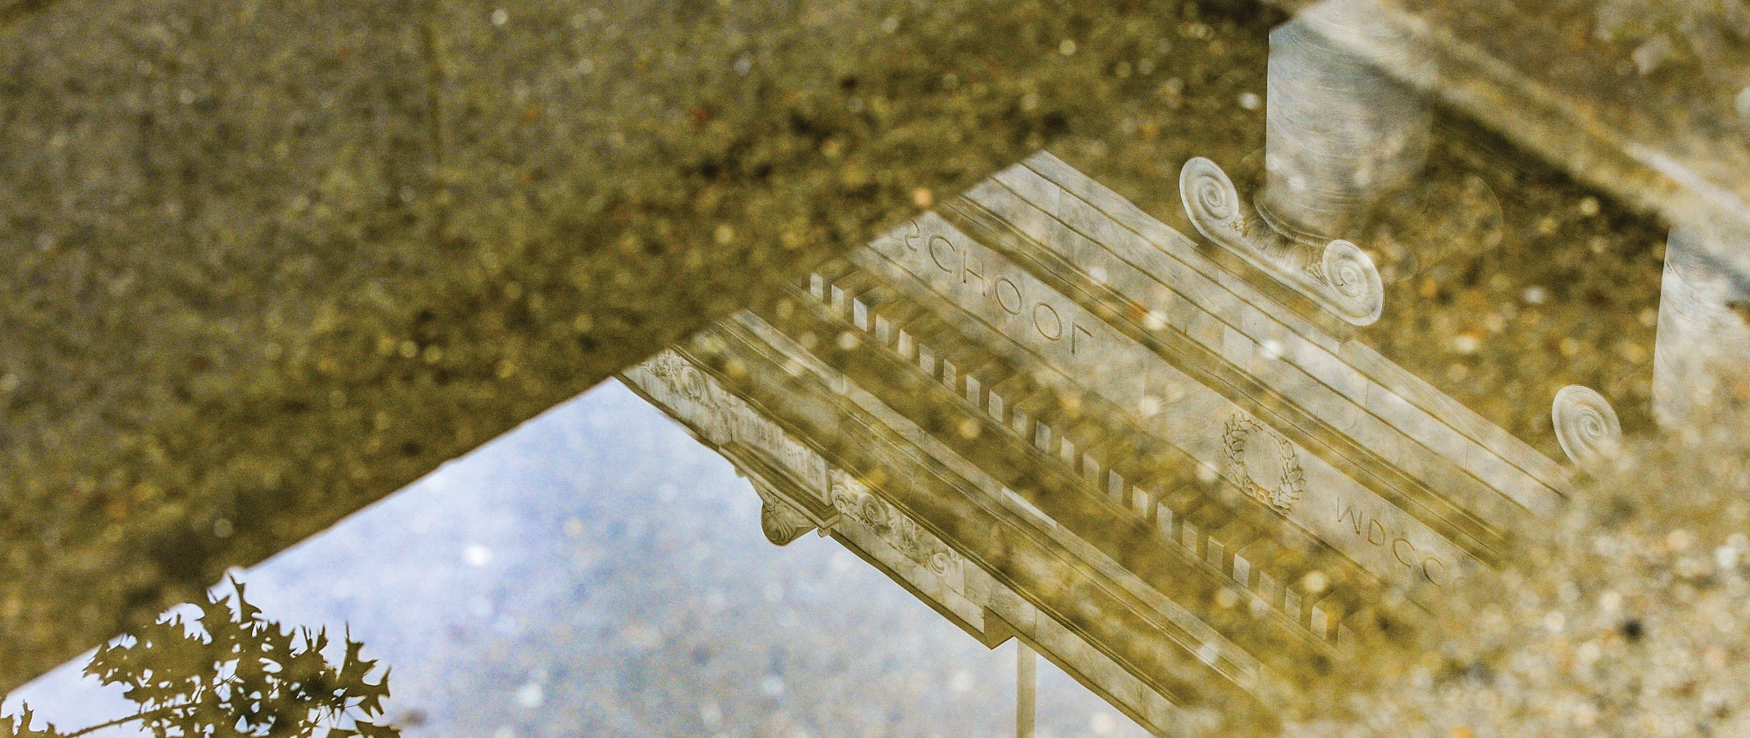 The Gordon Hall of Medicine is mirrored in a puddle on the Quad on a rainy day in August.